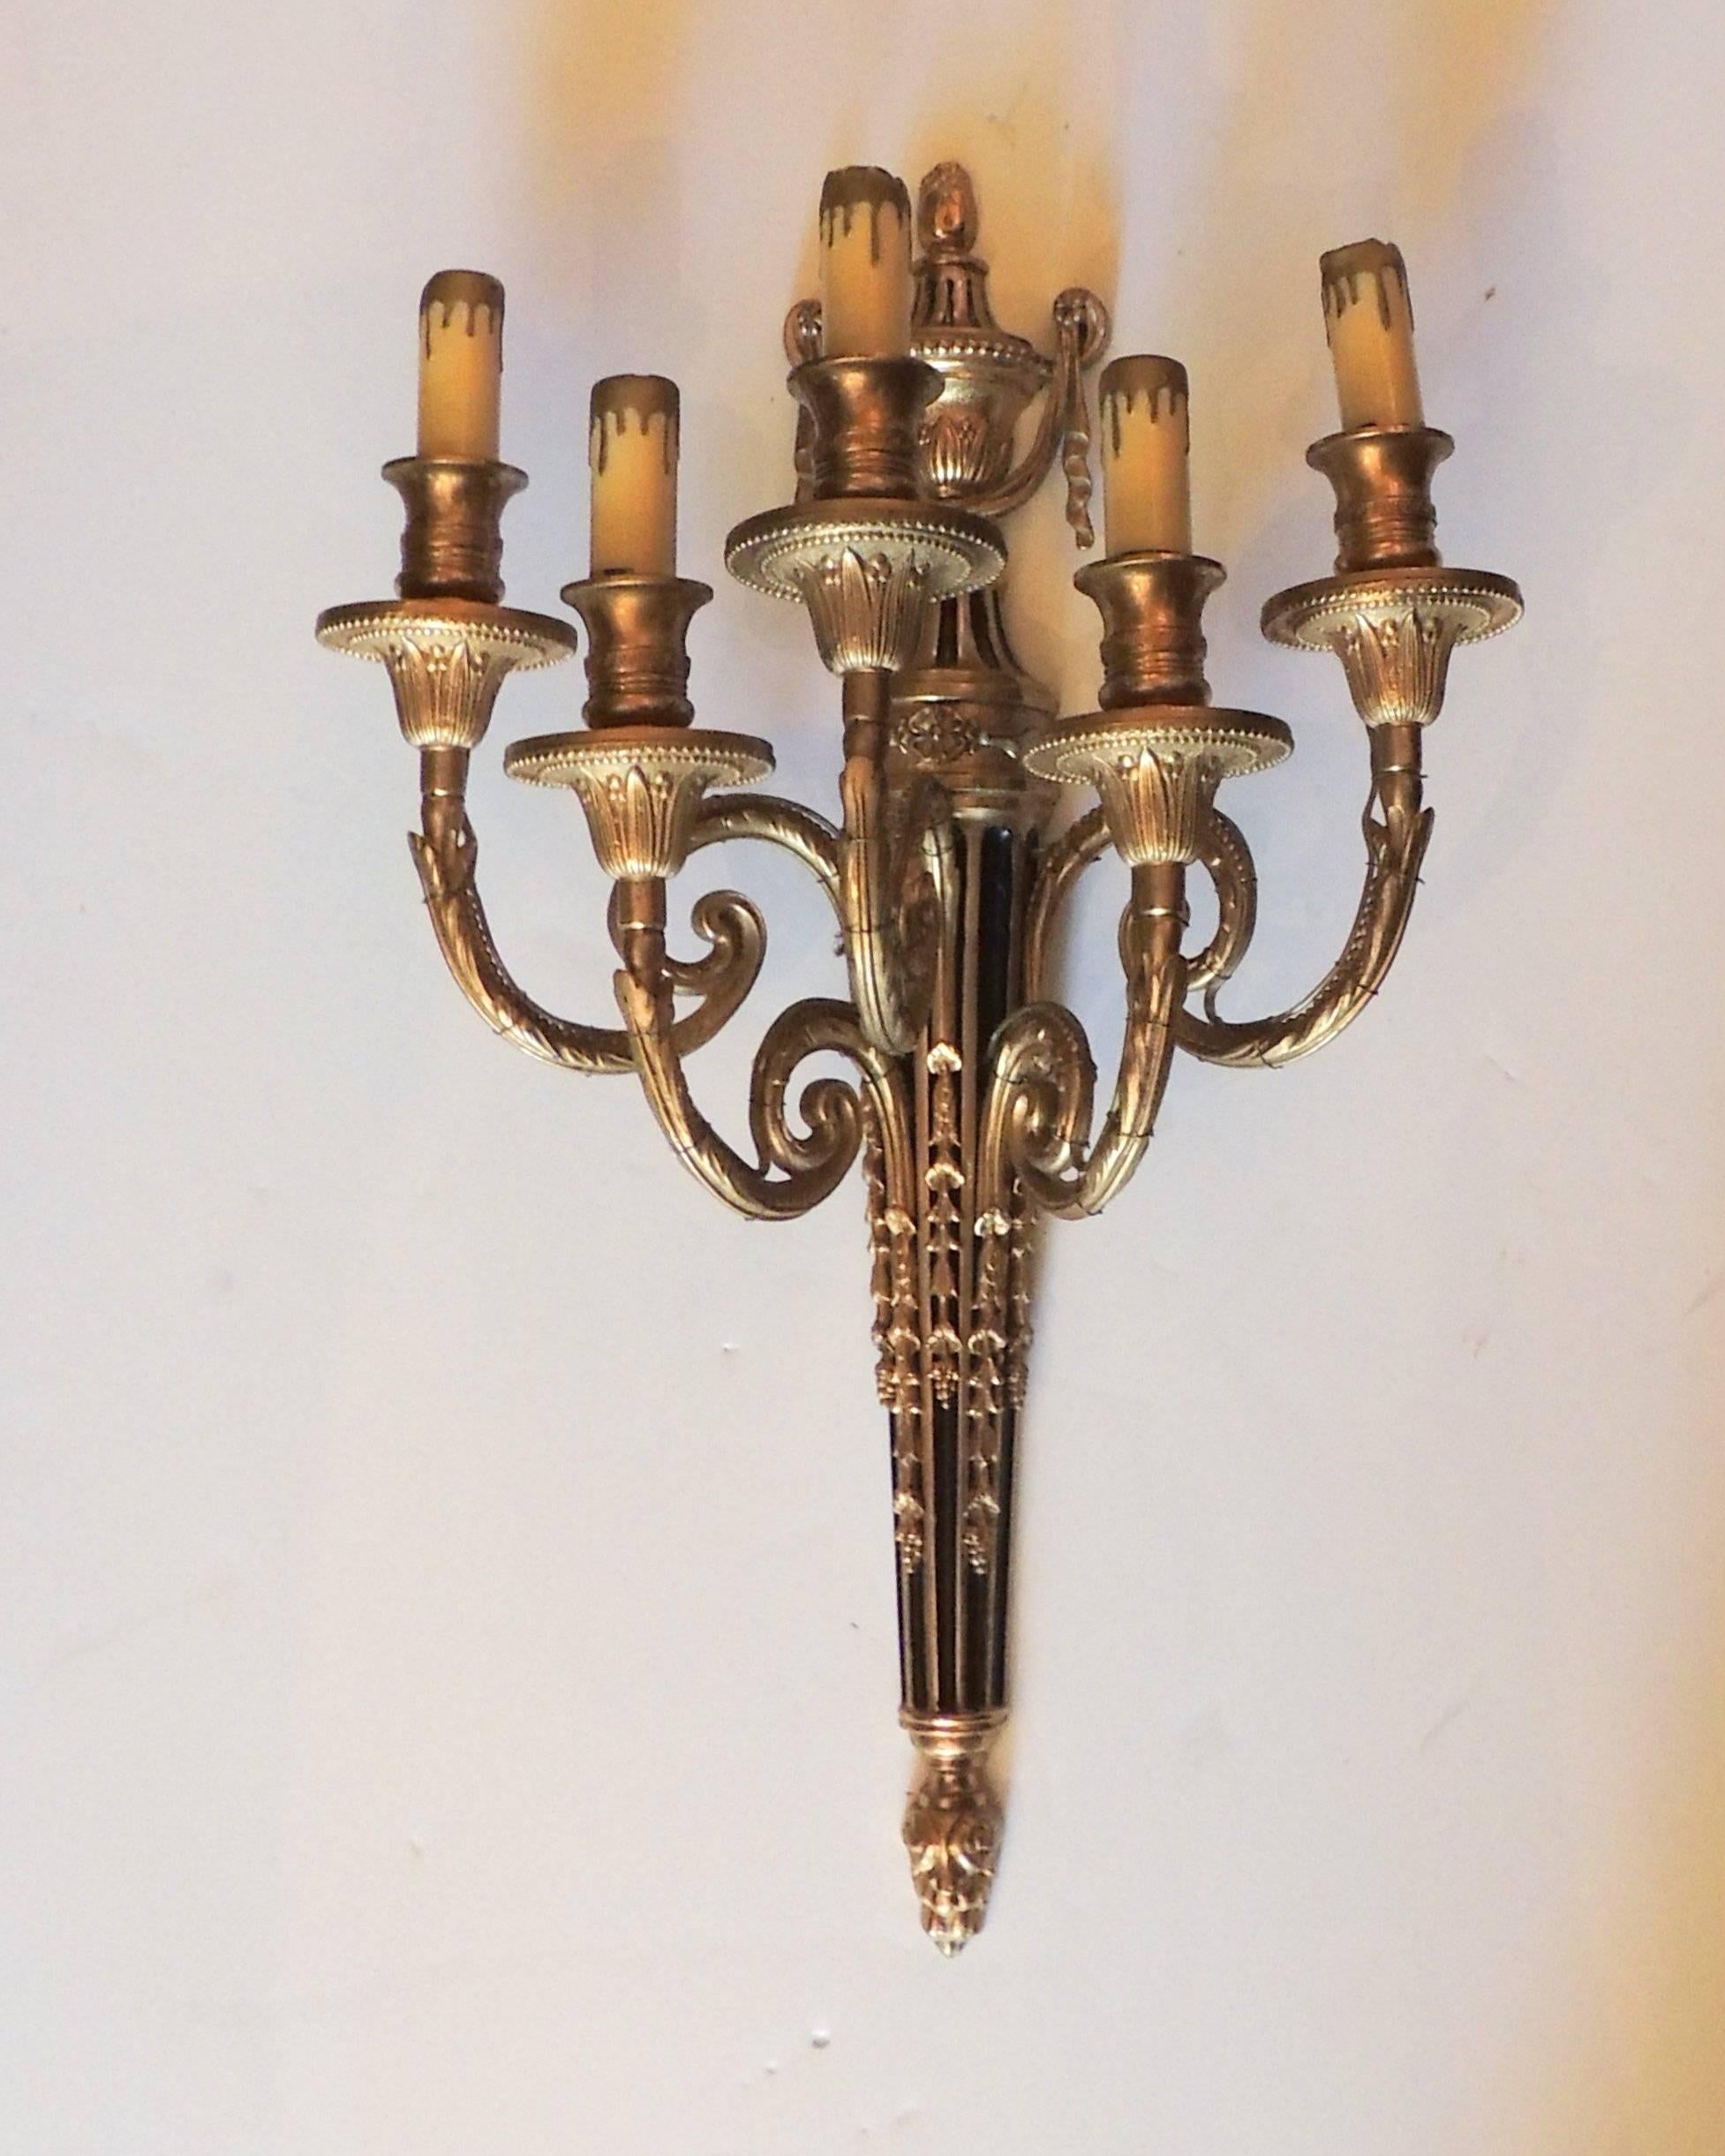 This wonderful five-arm neoclassical doré bronze sconce has patinated details along the interior, beautiful scroll arms, and detailed bobeches.

Measures: 20" H x 12" W x 7" D.